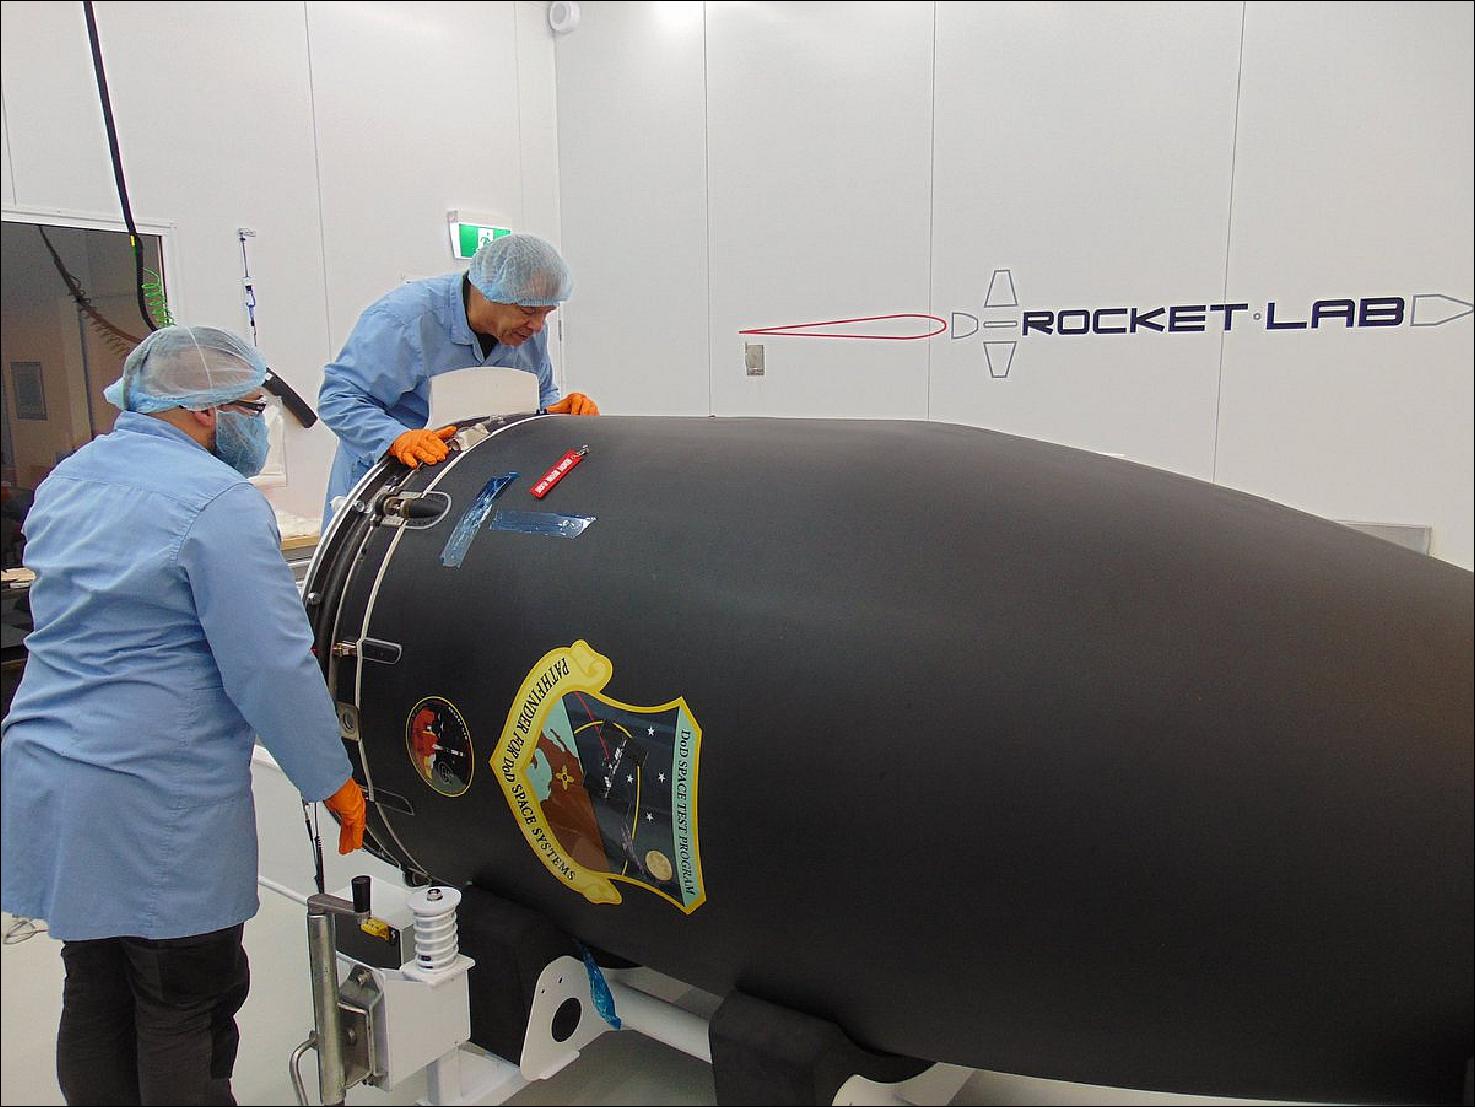 Figure 58: Payload integration into Electron's fairing, which took place on 30 April 2019 (image credit: Rocket Lab)